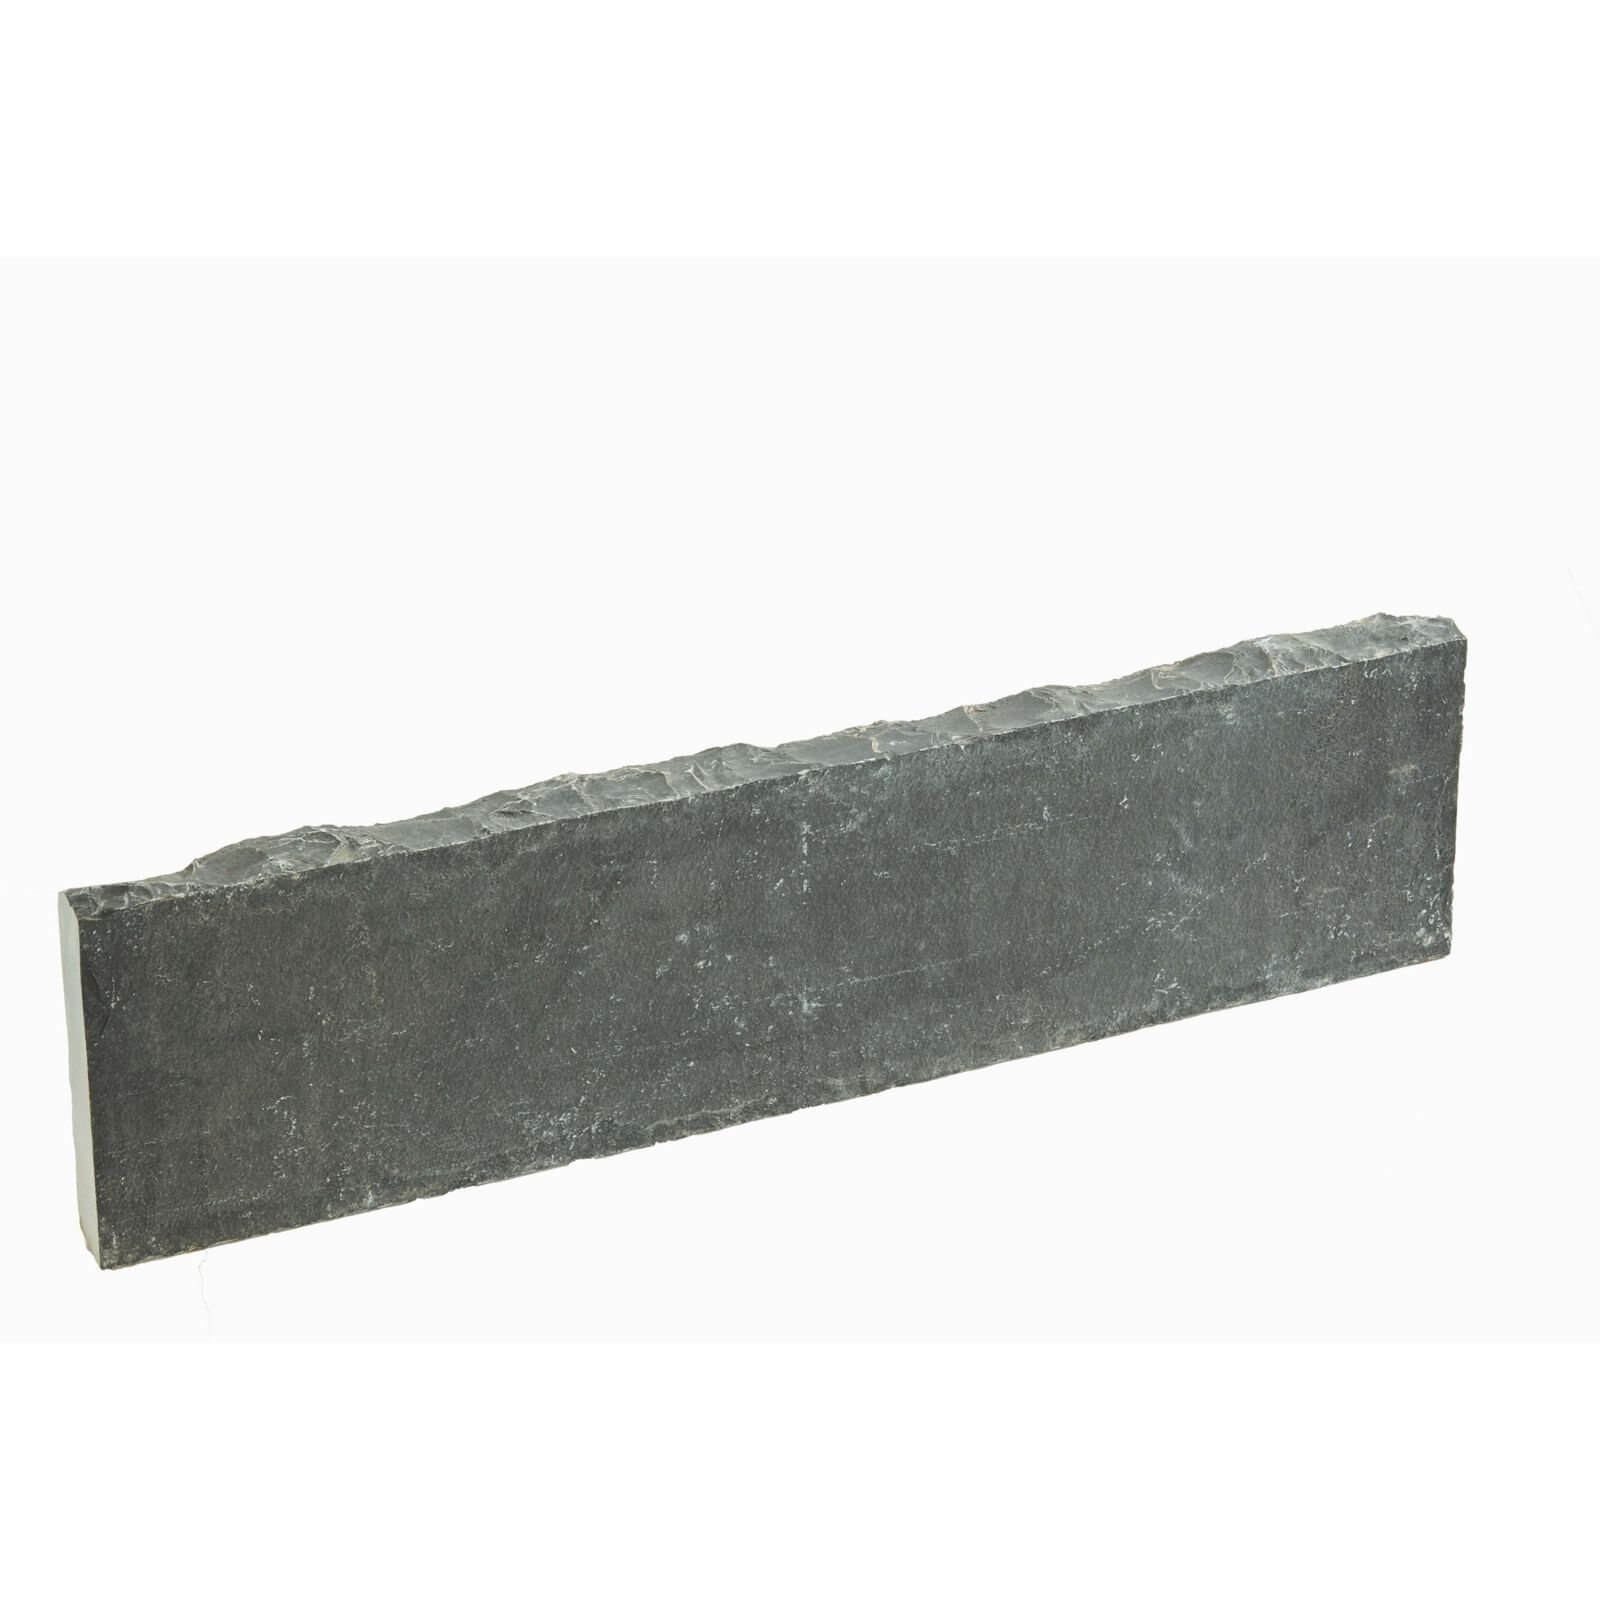 Stylish Stone Natural Stone Coping Or Edging - Charcoal